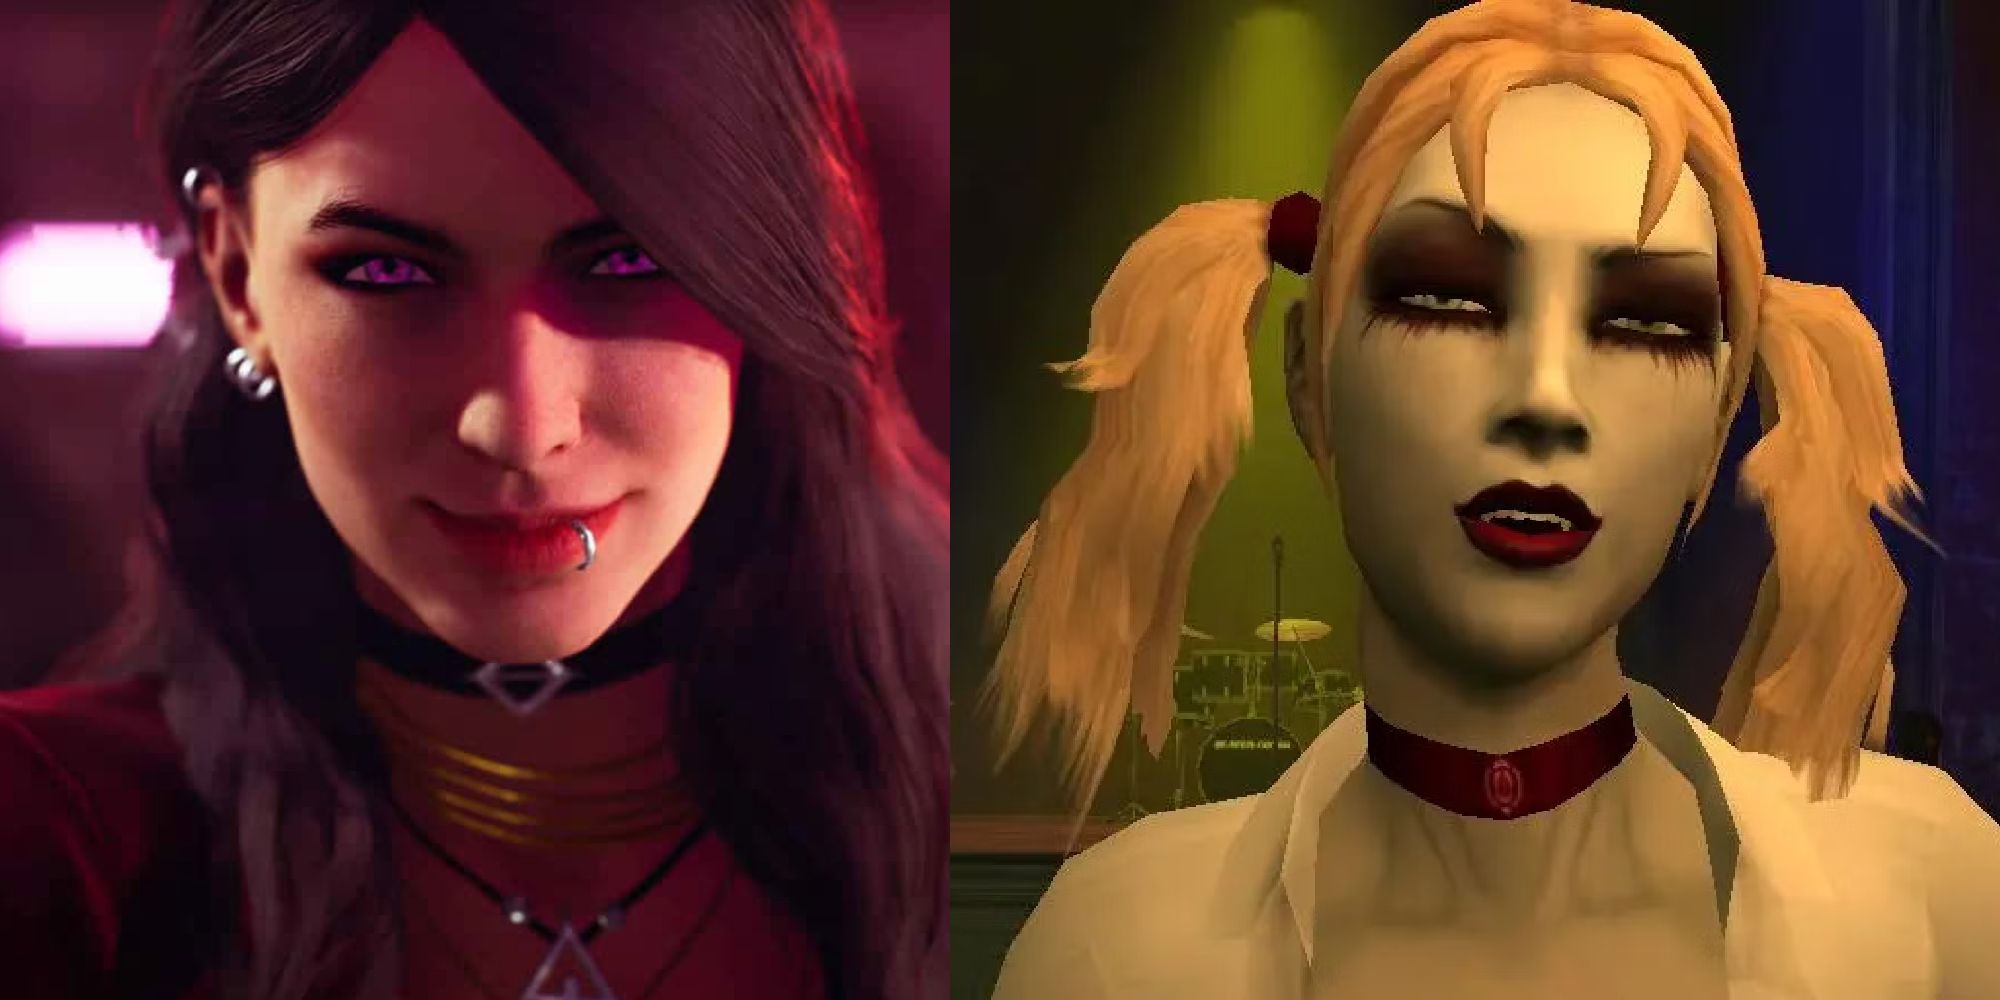 Elif from Bloodlines 2 and Jeanette from Bloodlines.